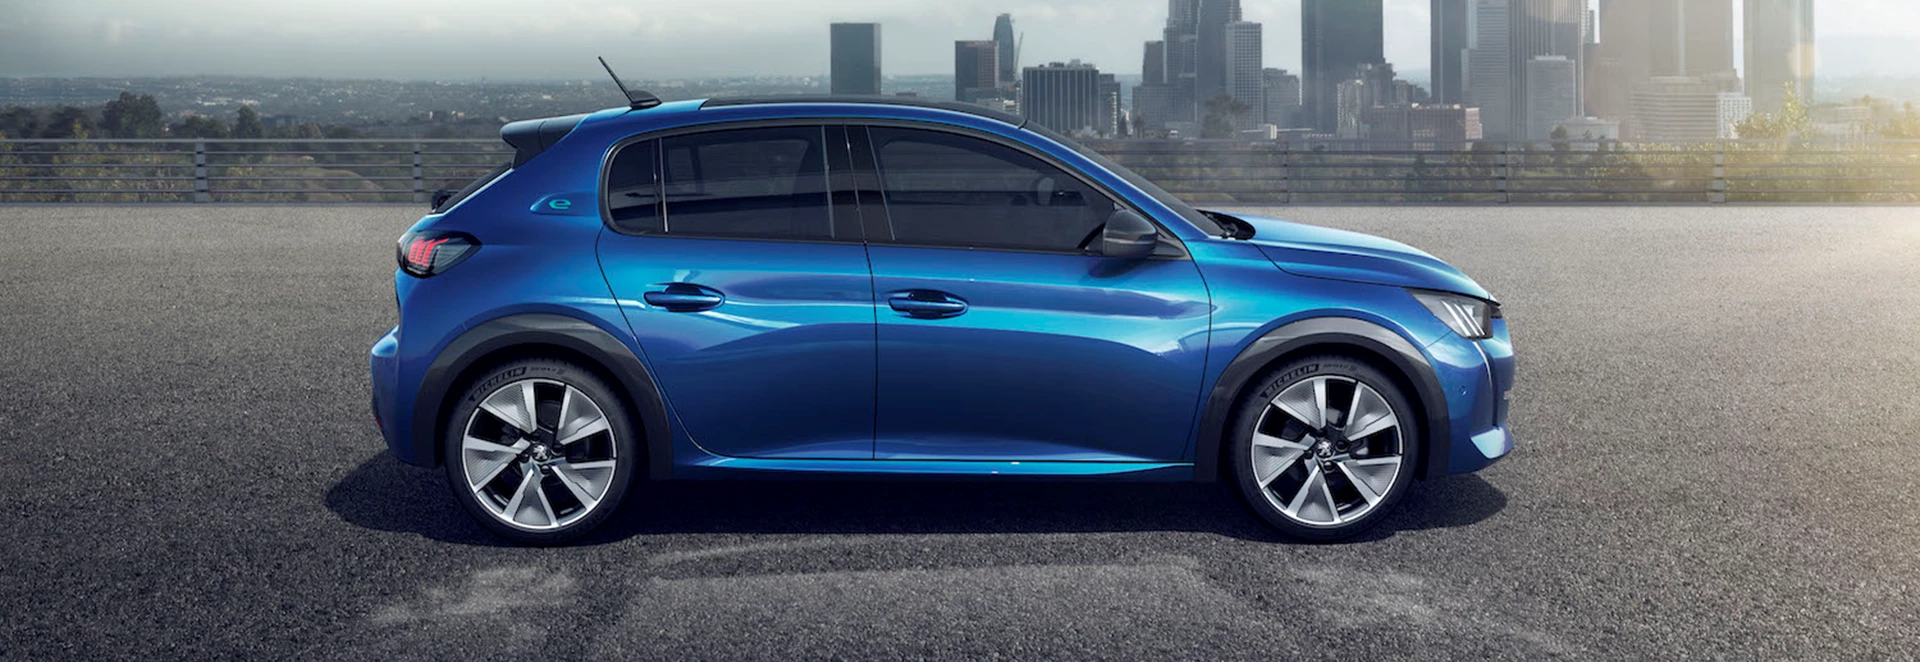 The advantages of going electric with the Peugeot e-208